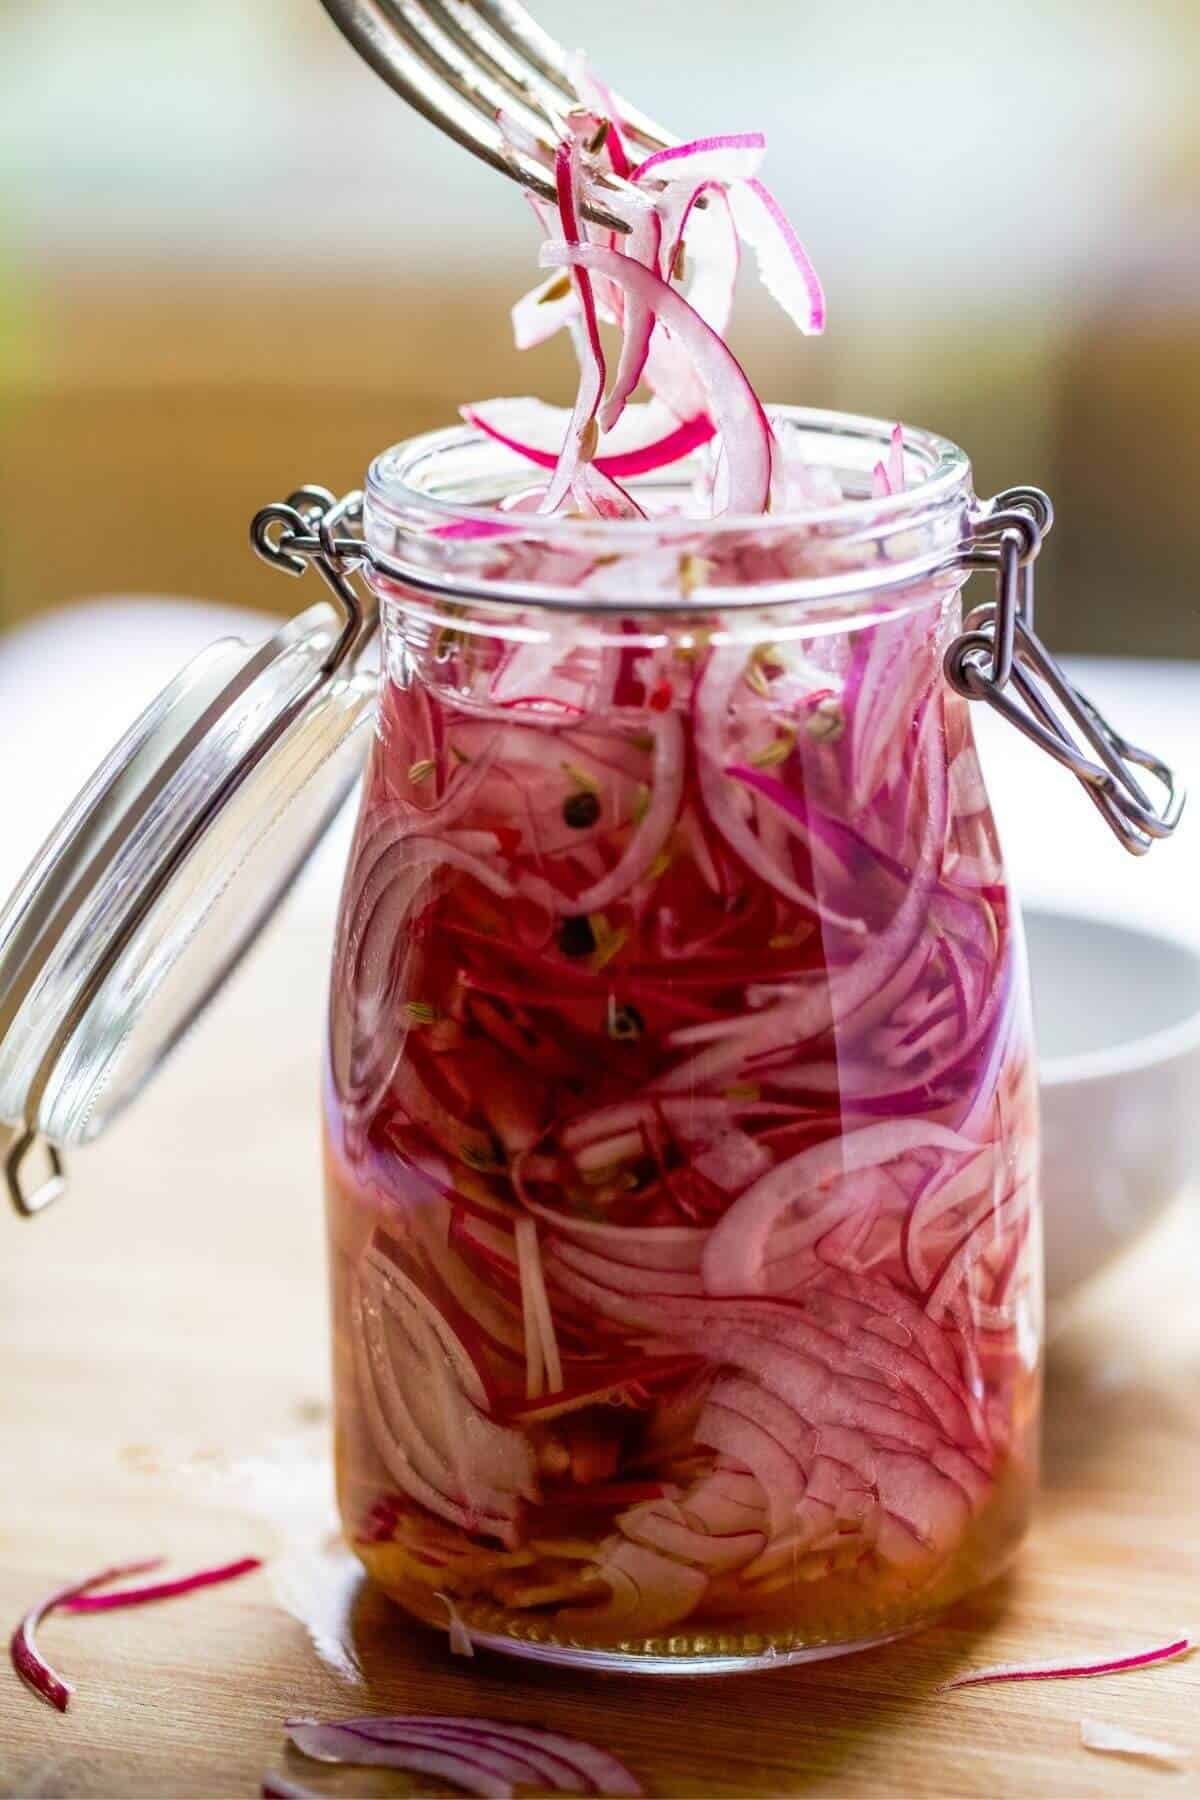 A silver fork lifts a few slices of red onion pickles from a small mason jar of pickles.